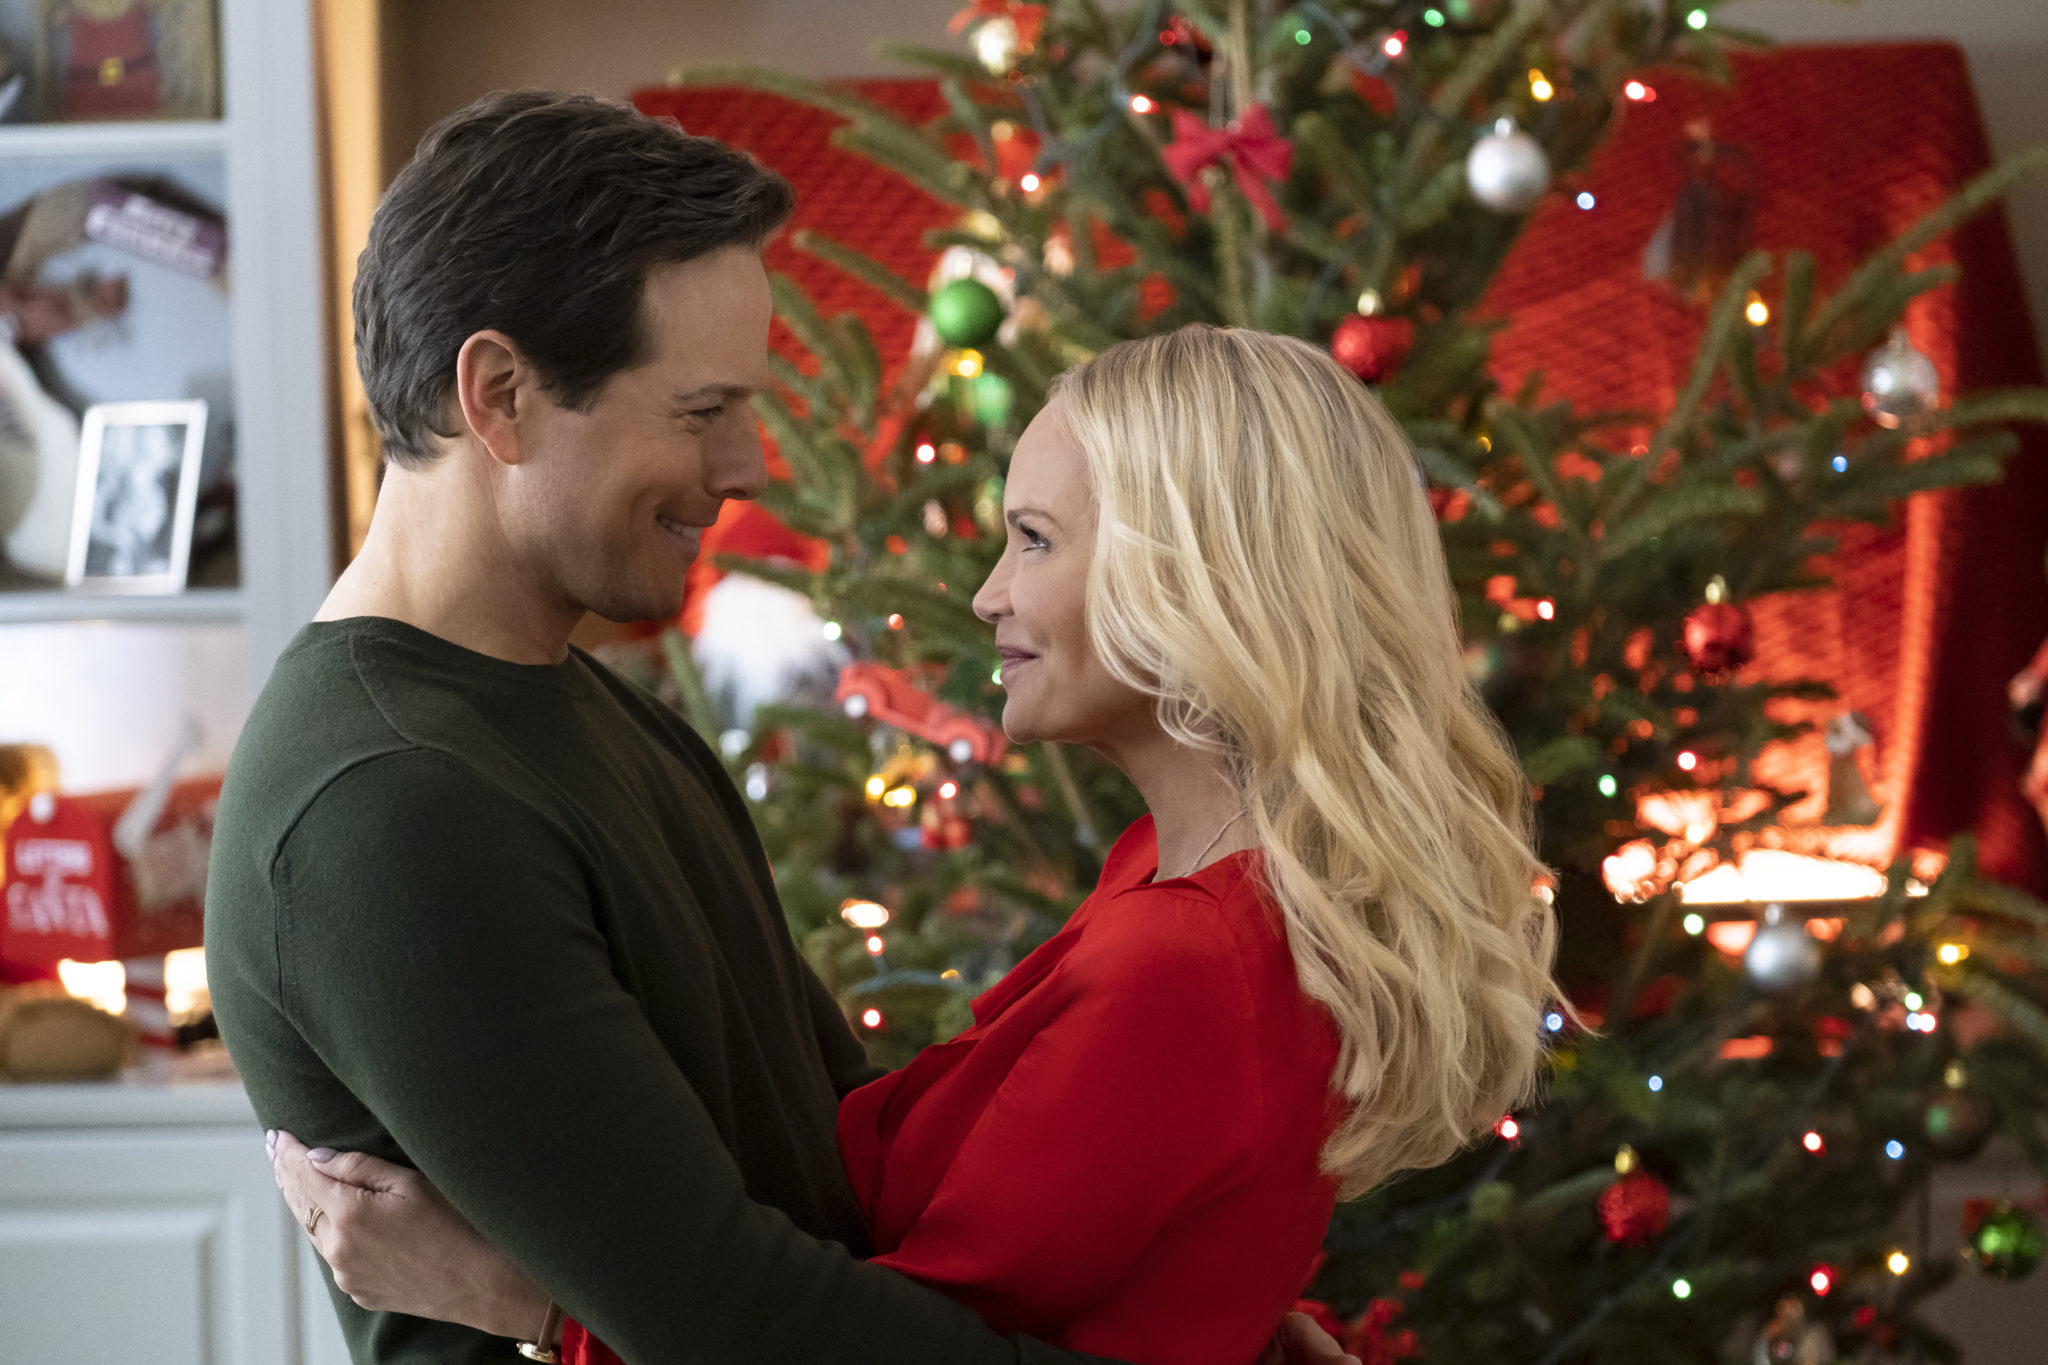 Hallmark's 'A Christmas Love Story' Everything You Need To Know